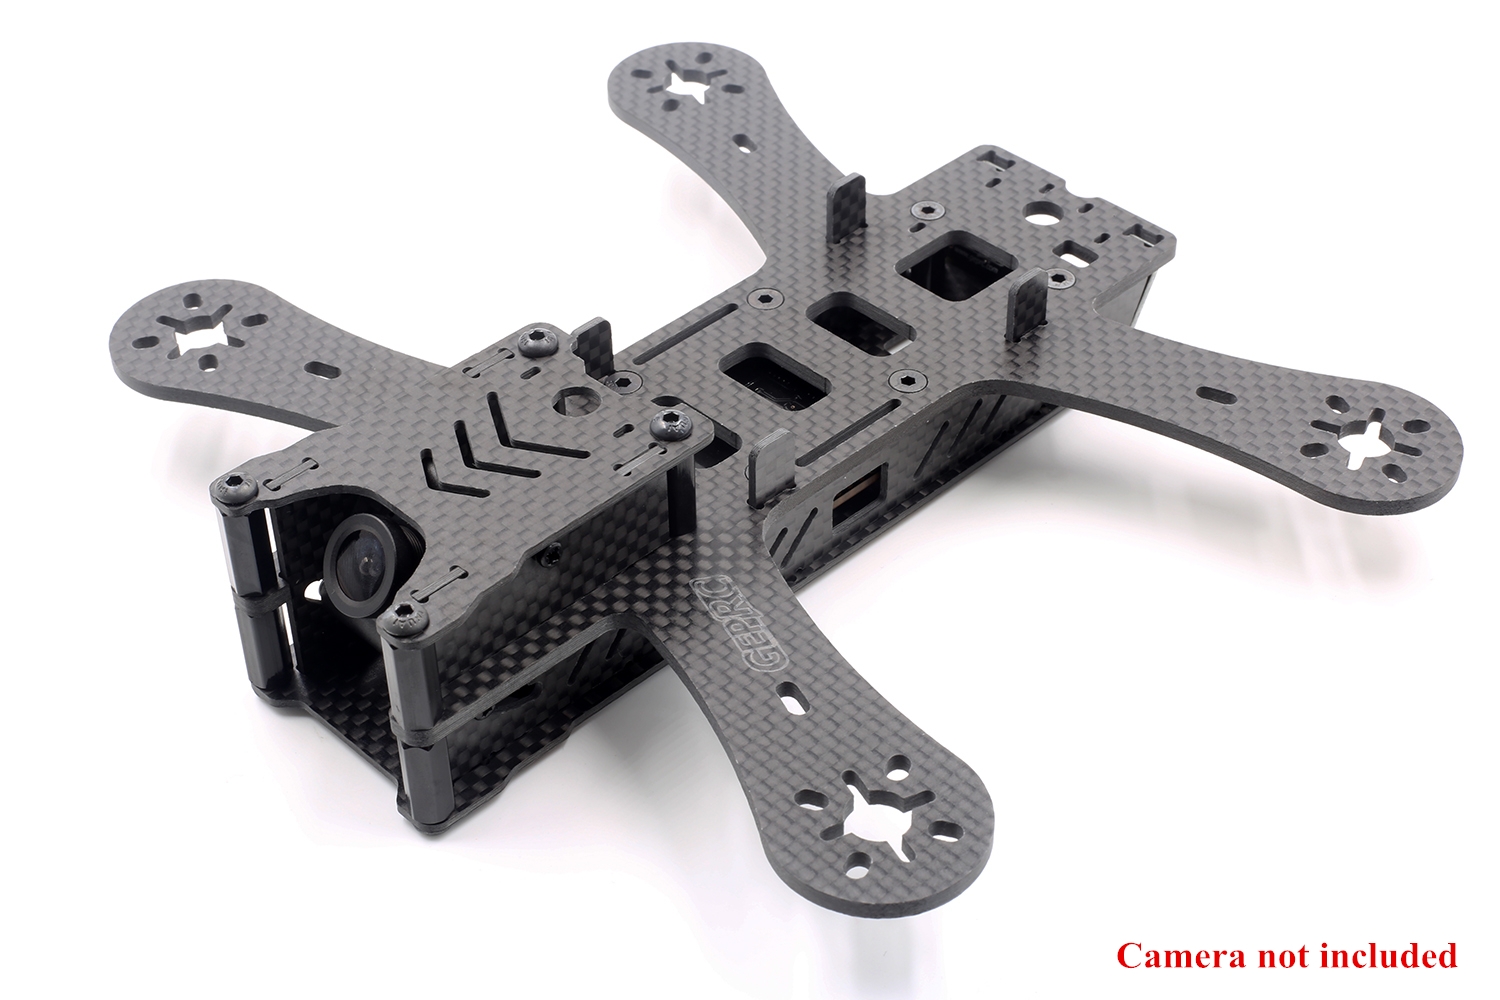 GEPRC FPV GEP180 180MM Carbon Fiber Frame Kit with PDB WS28128 LED Board